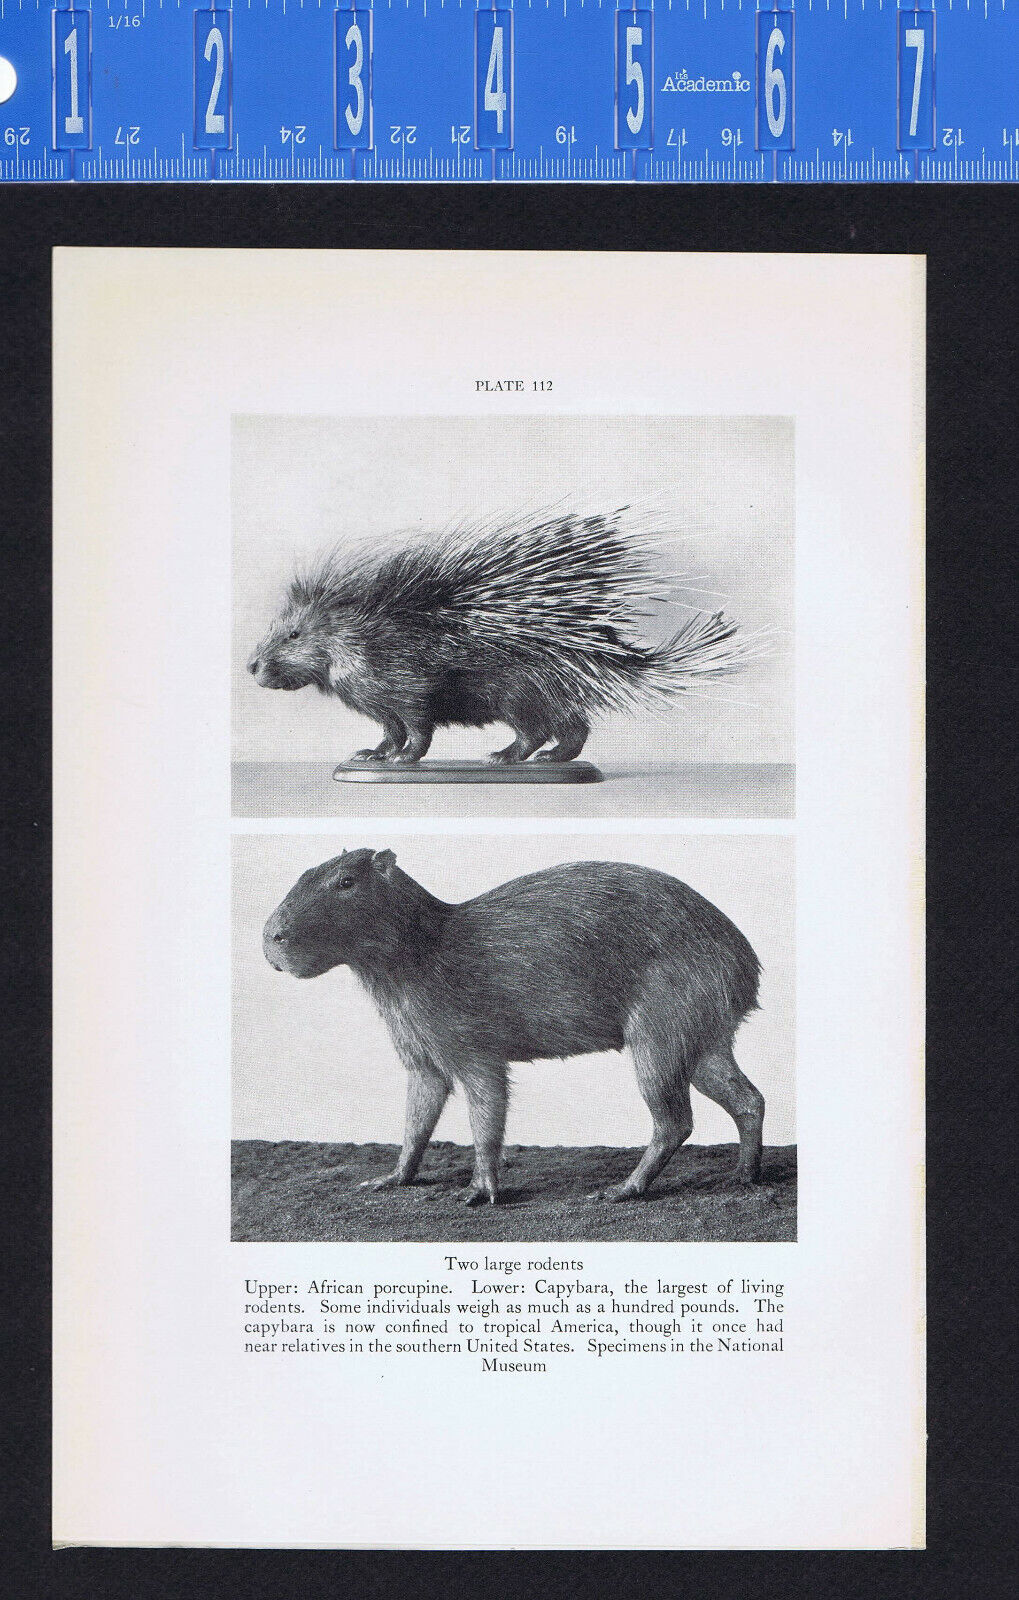 African Porcupine, Capybara & Lemming (Rodents) -1934 Scientific Print